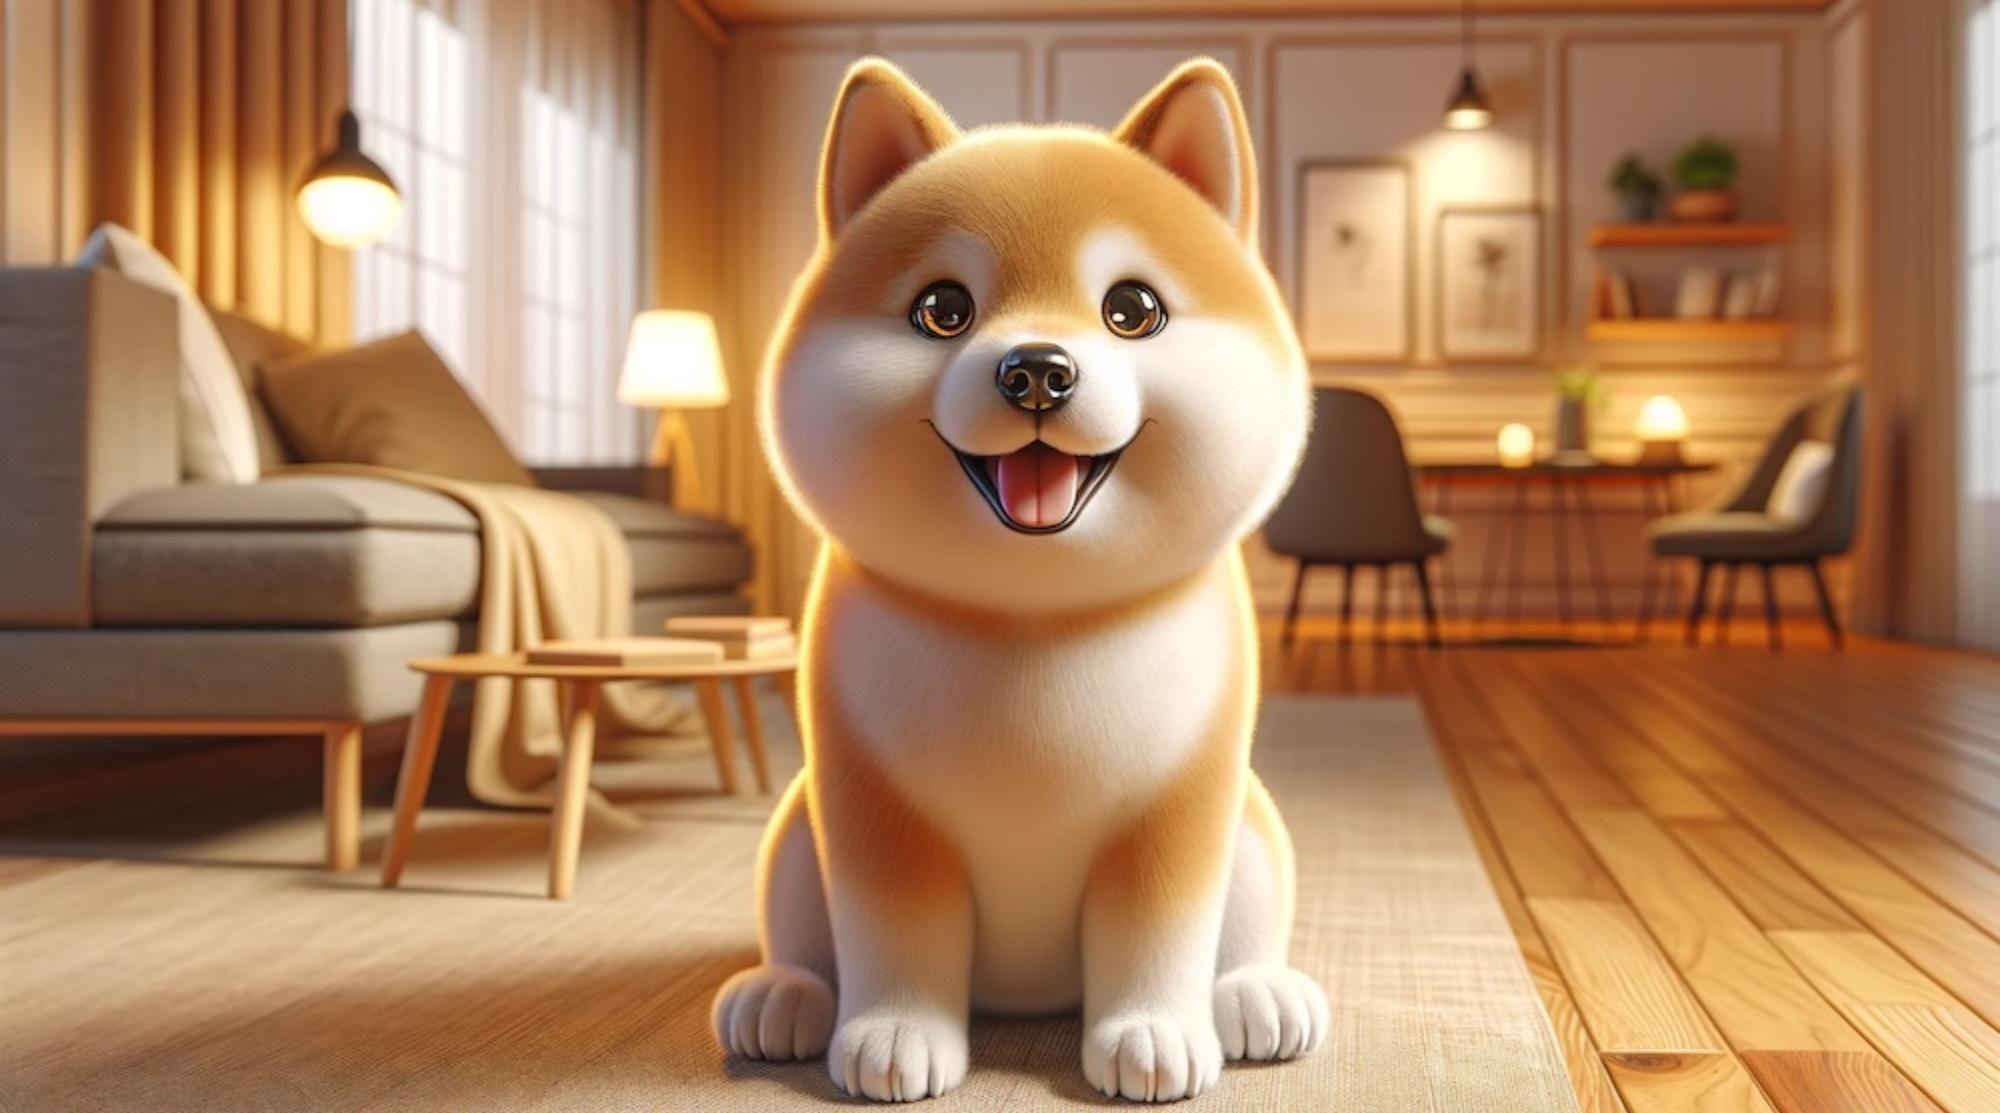 Farewell to Kabosu: The Doge Meme Icon Bows Out